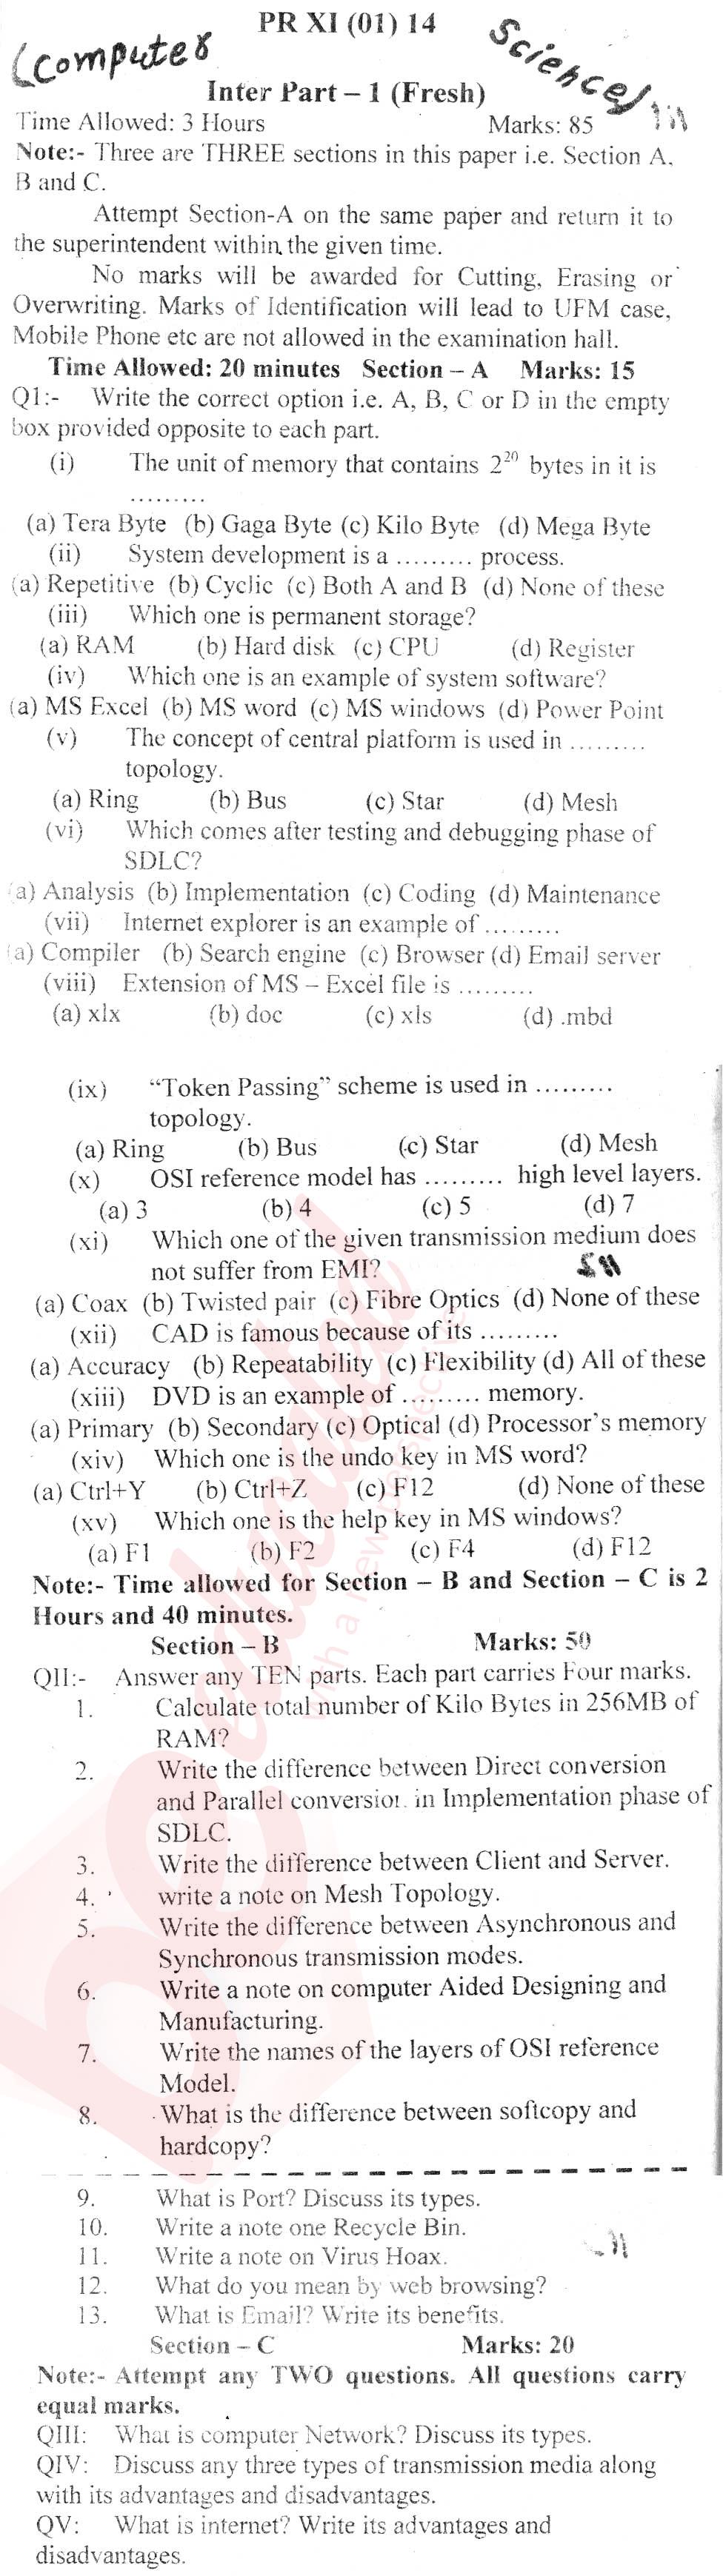 Computer Science ICS Part 1 Past Paper Group 1 BISE Malakand 2014